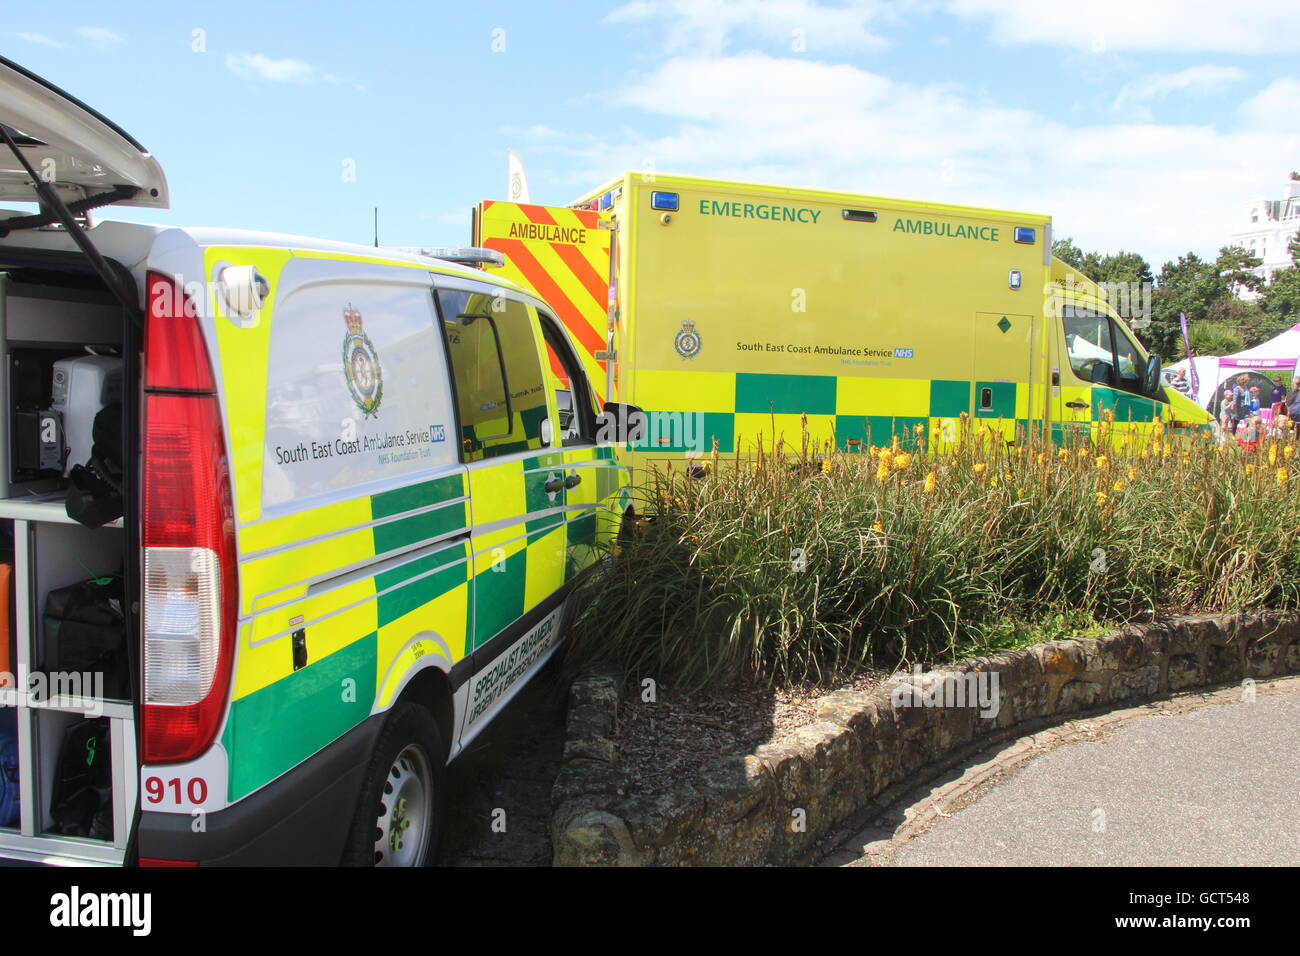 TWO SOUTH EAST COAST AMBULANCE VEHICLES PARKED TOGETHER,AN EMERGENCY AMBULANCE AND A FIRST RESPONSE SPECIALIST PARAMEDIC VEHICLE Stock Photo